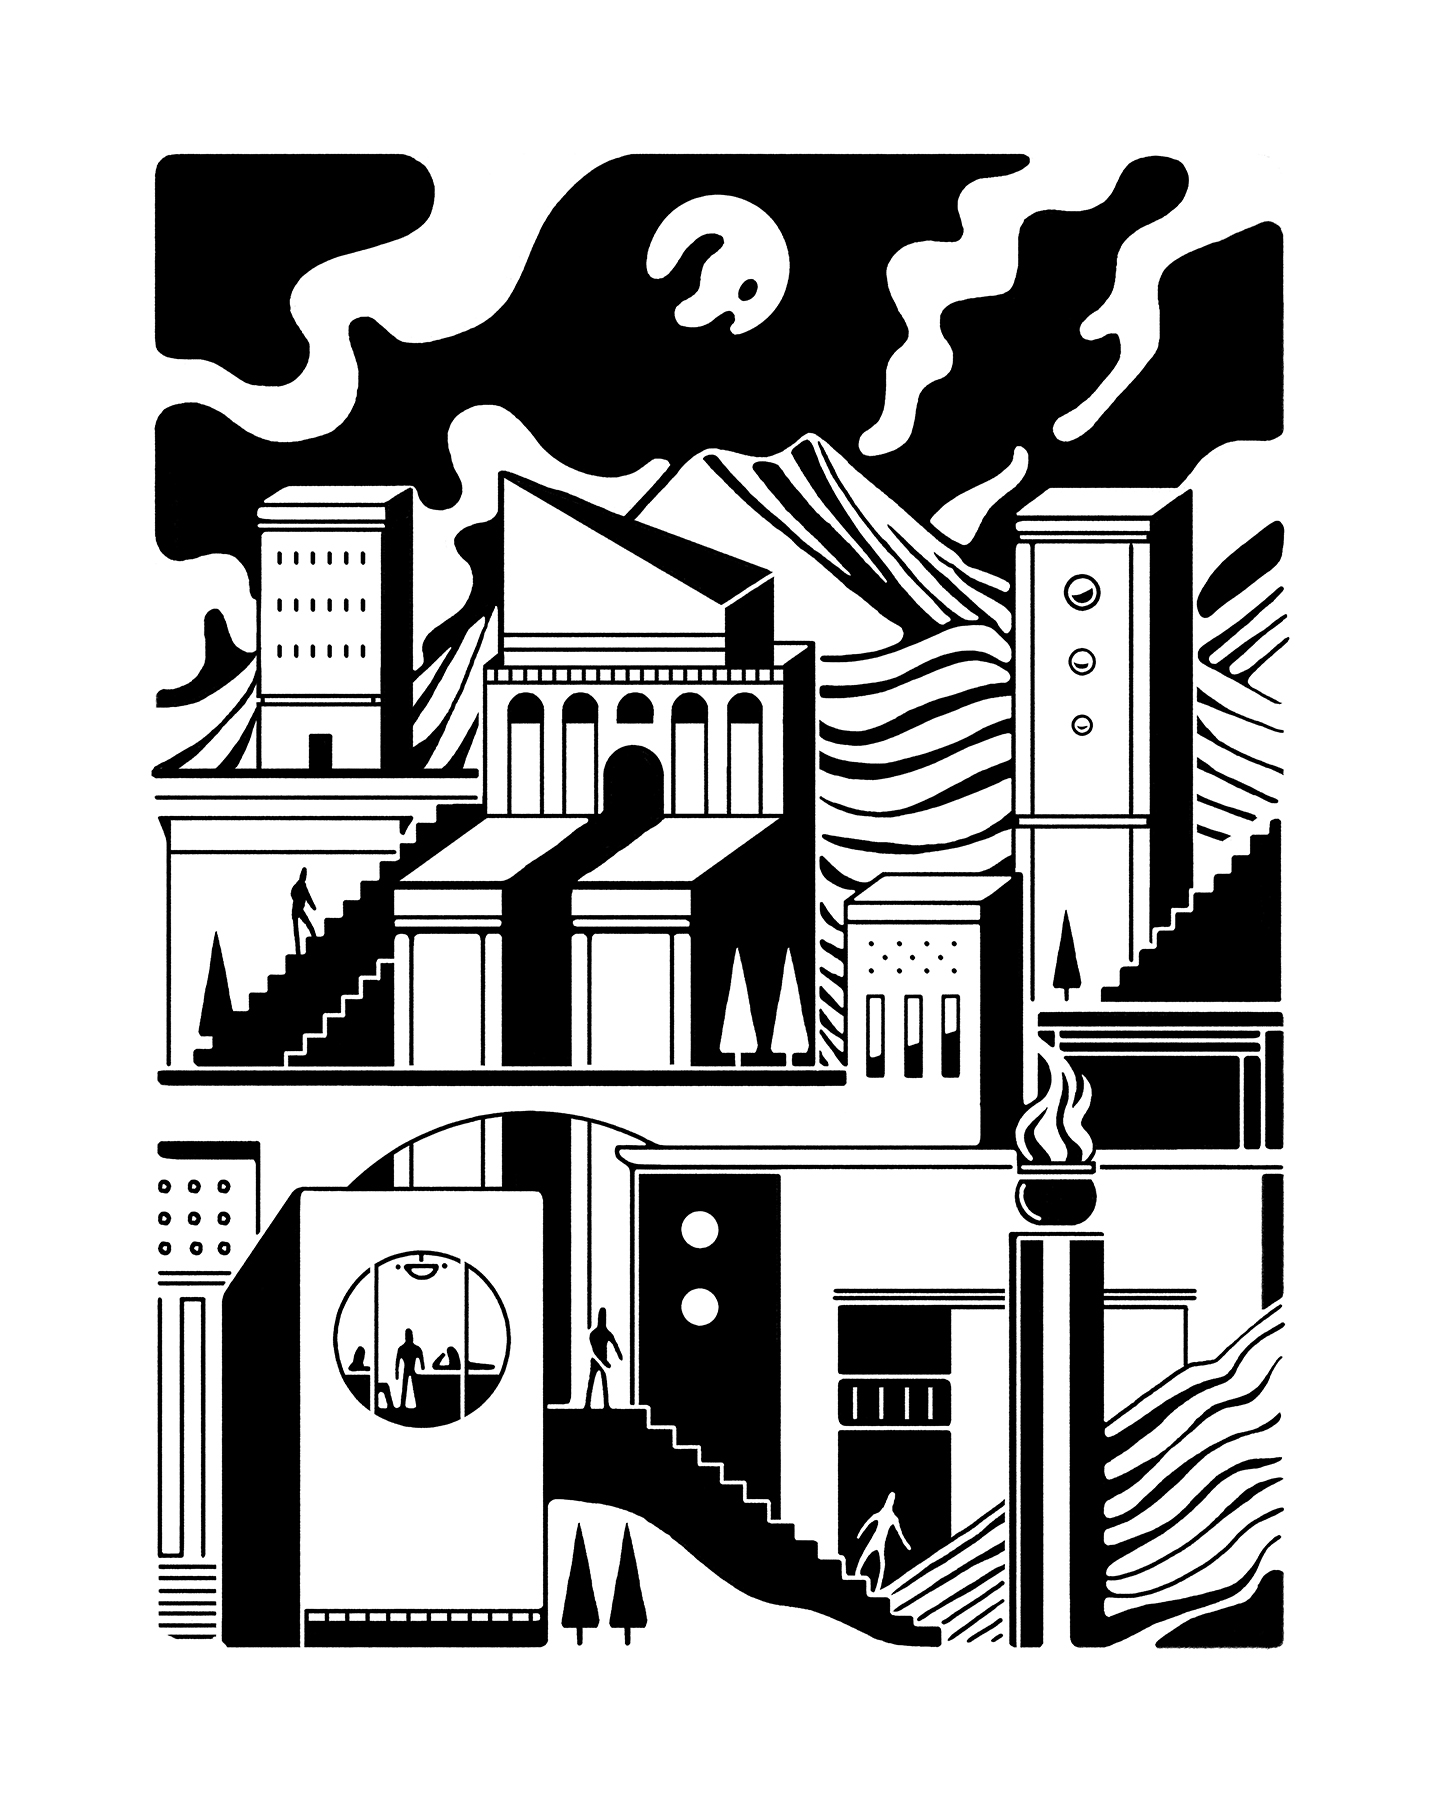 City-in-the-Night-dylan-fowler-illustration.jpg